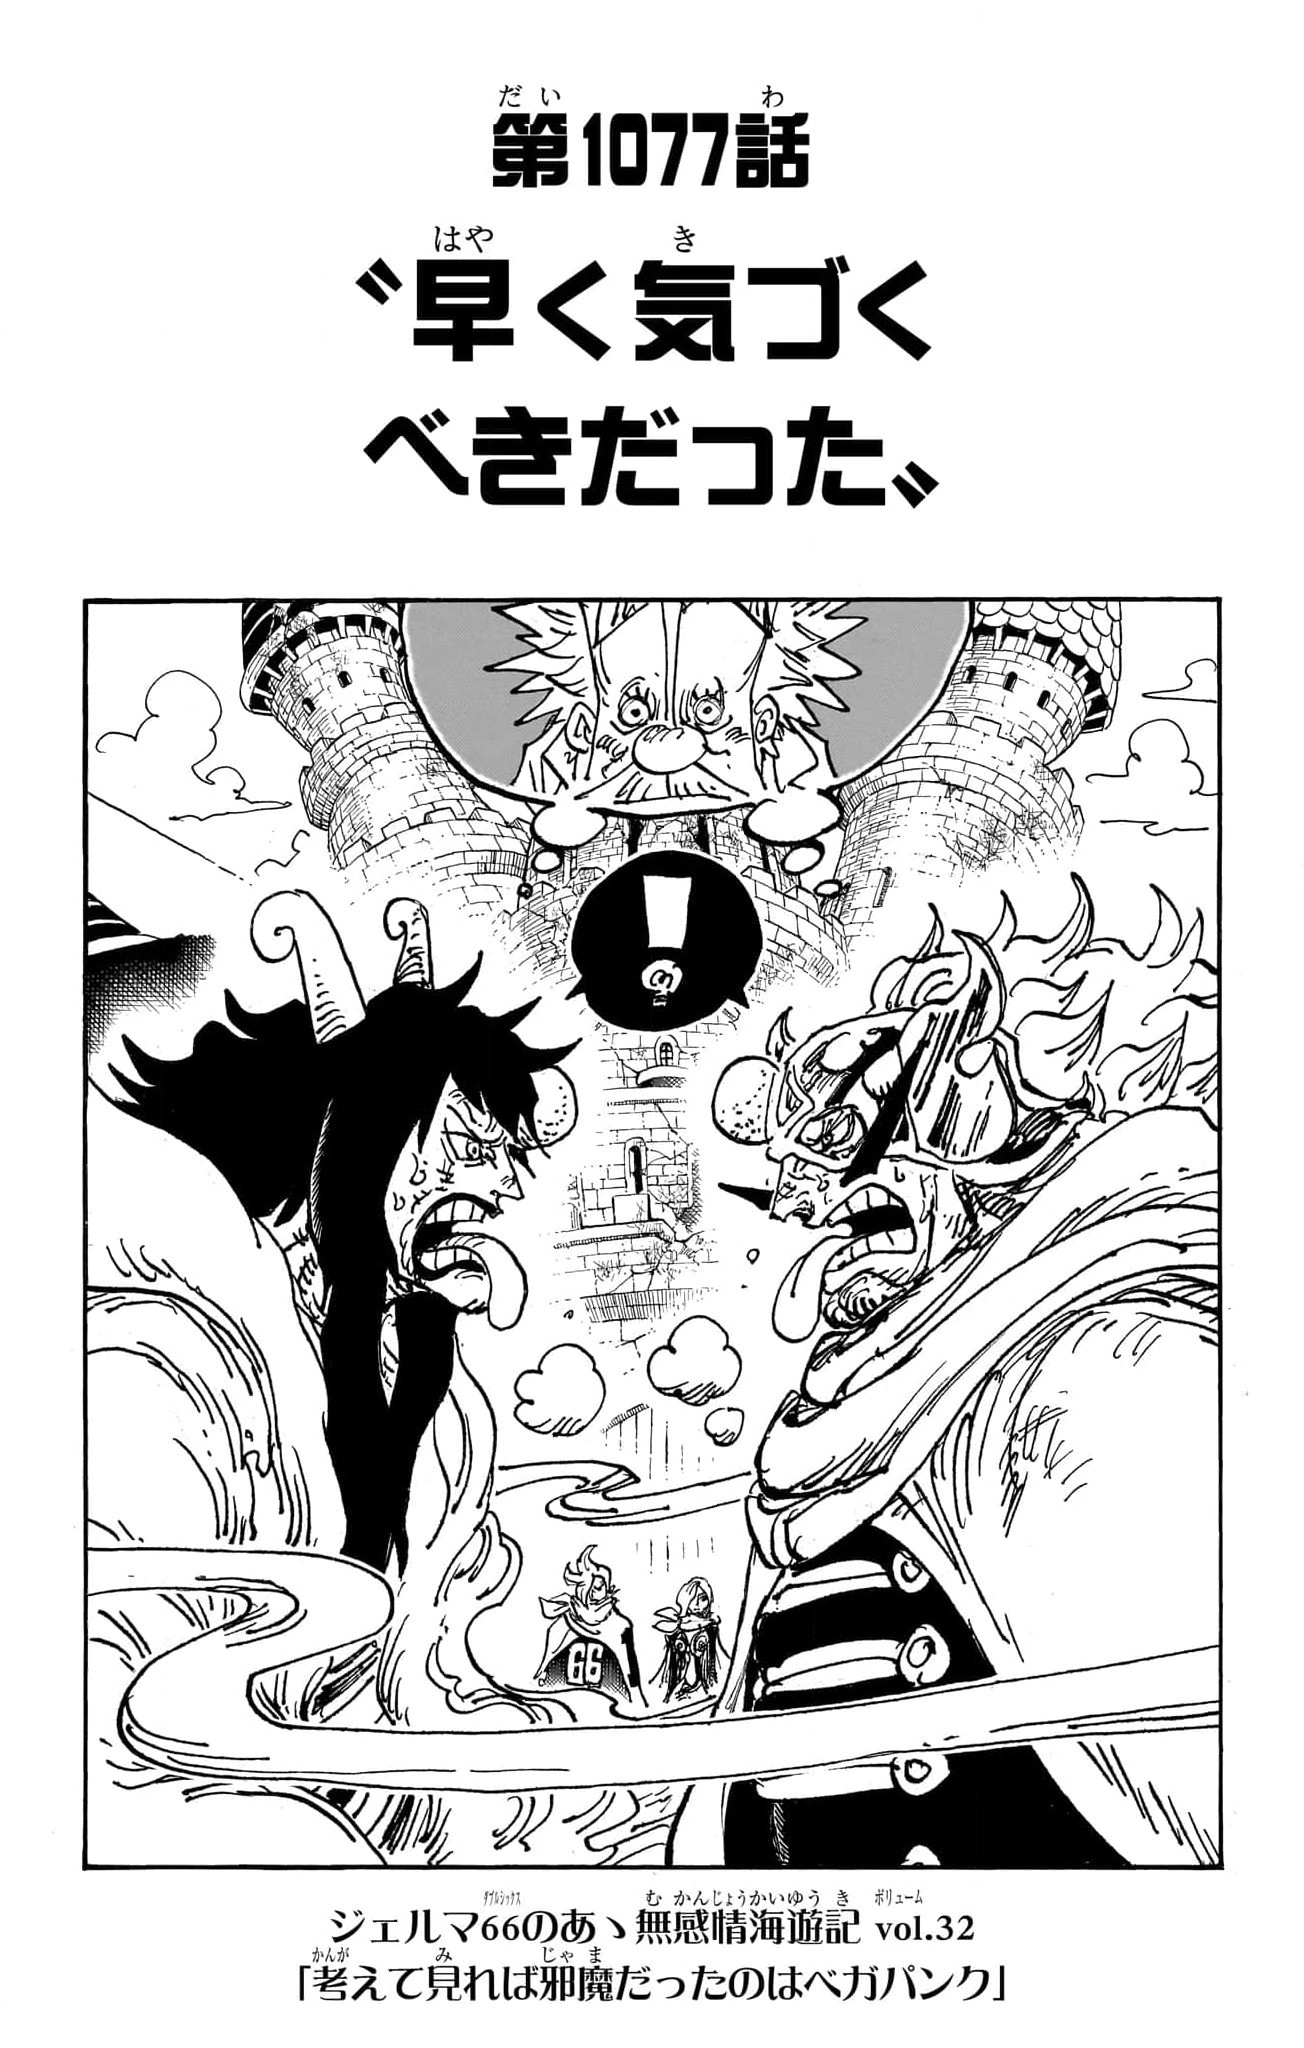 One Piece 1097 Spoiler: The Pirate King vs. the World Government?